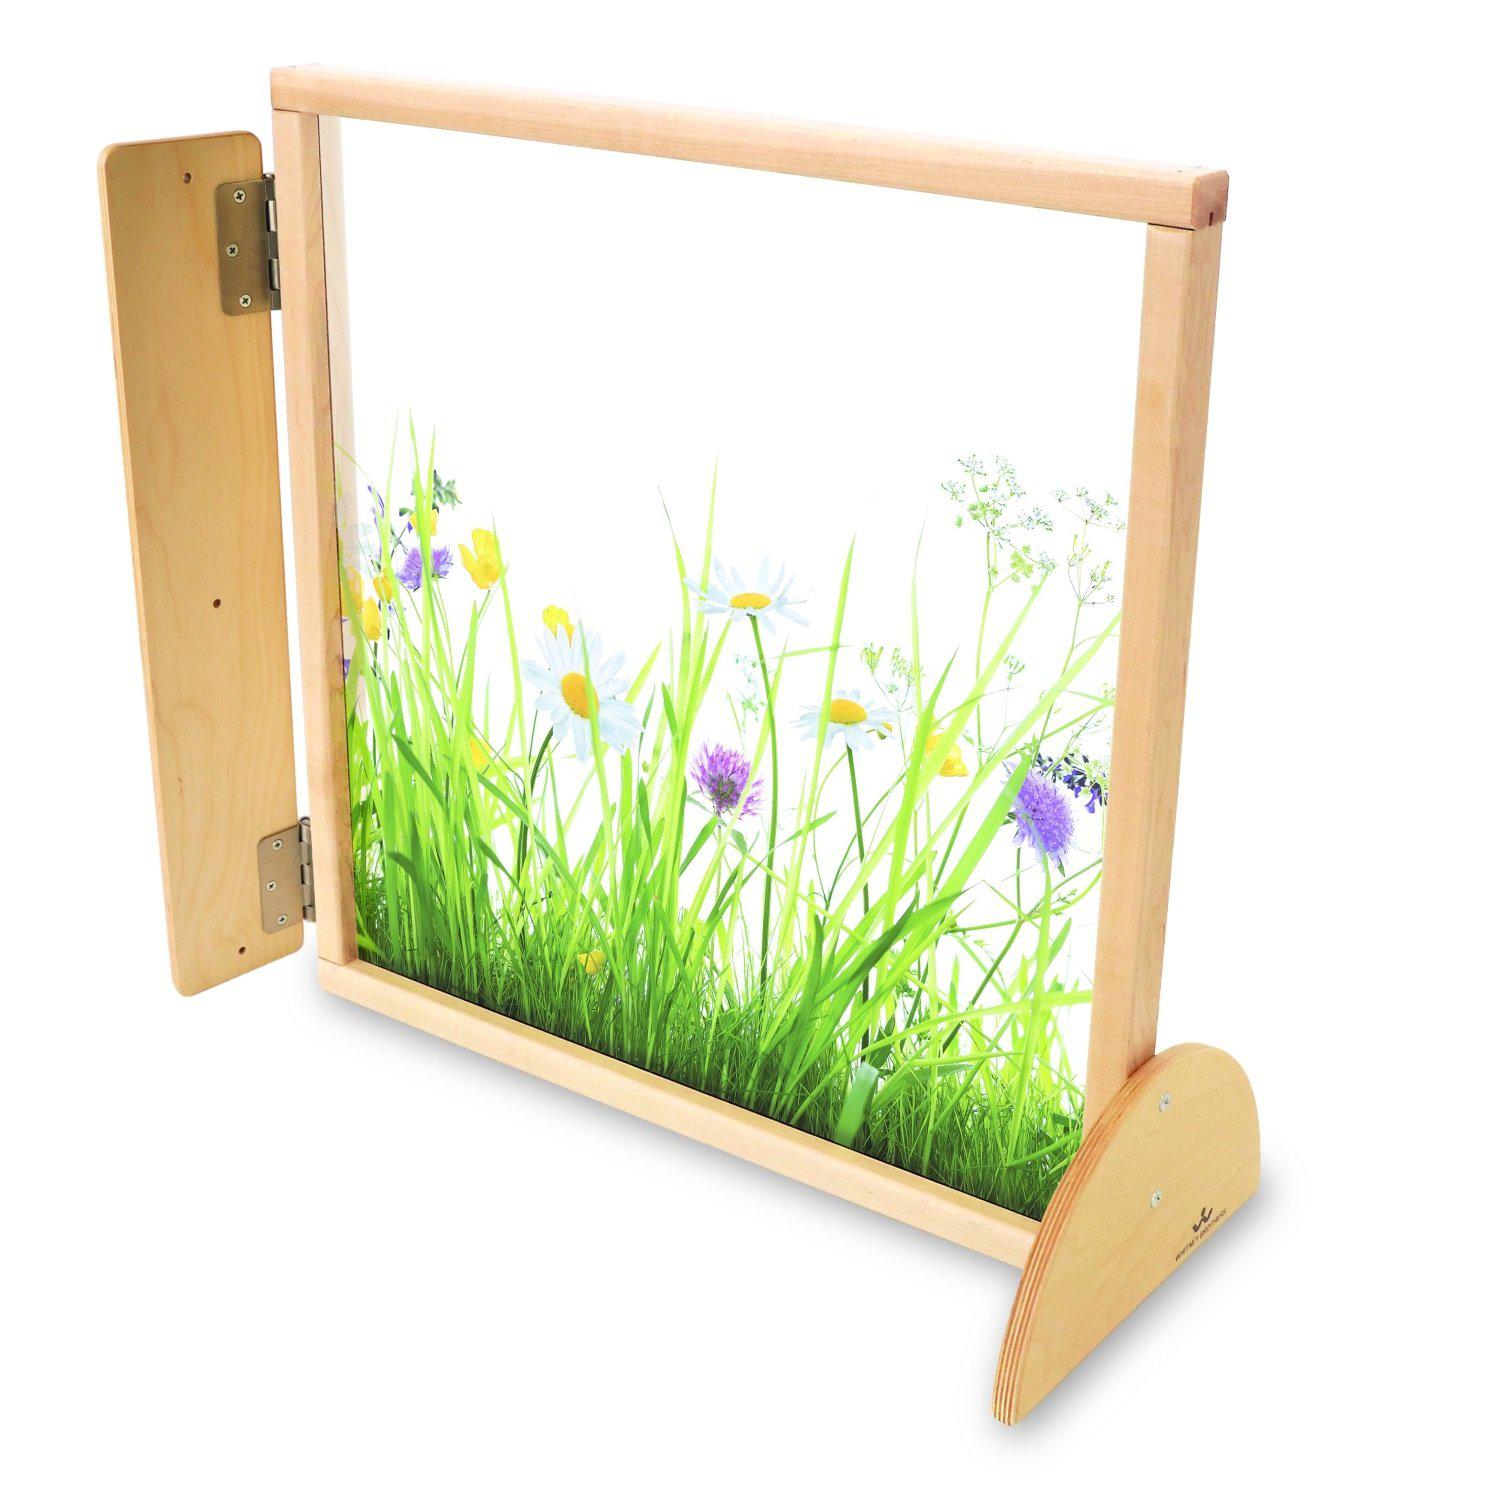 Nature View Divider Panel, 24" W